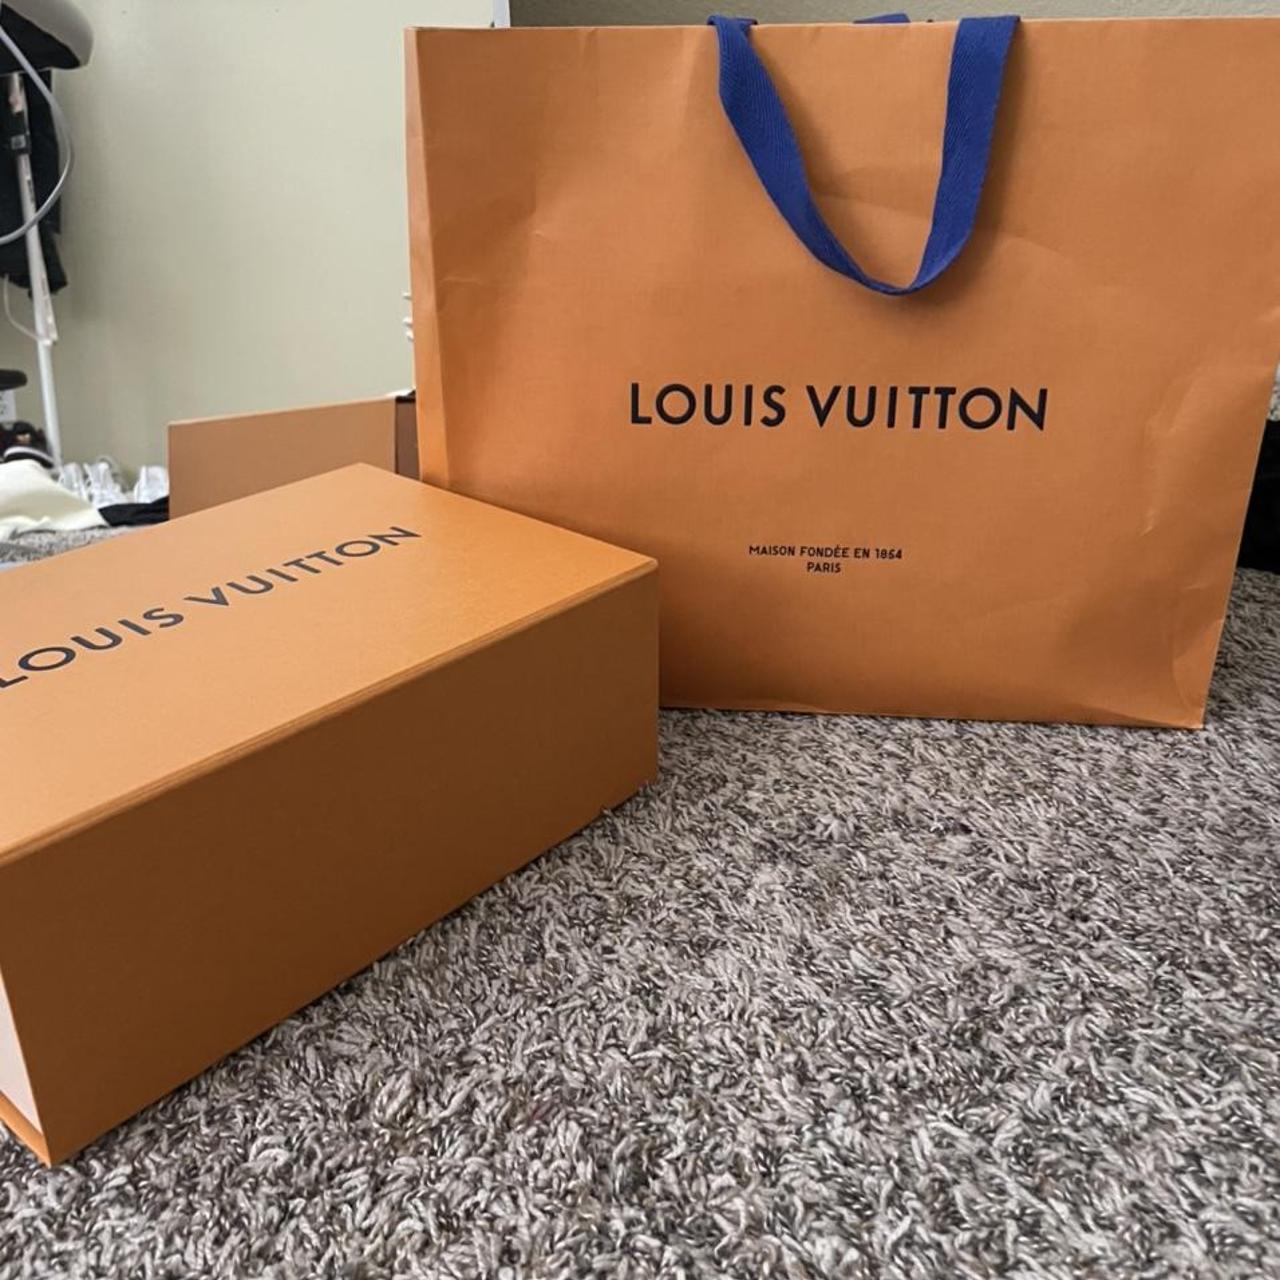 100% authentic Louis Vuitton shoes I’ve only worn